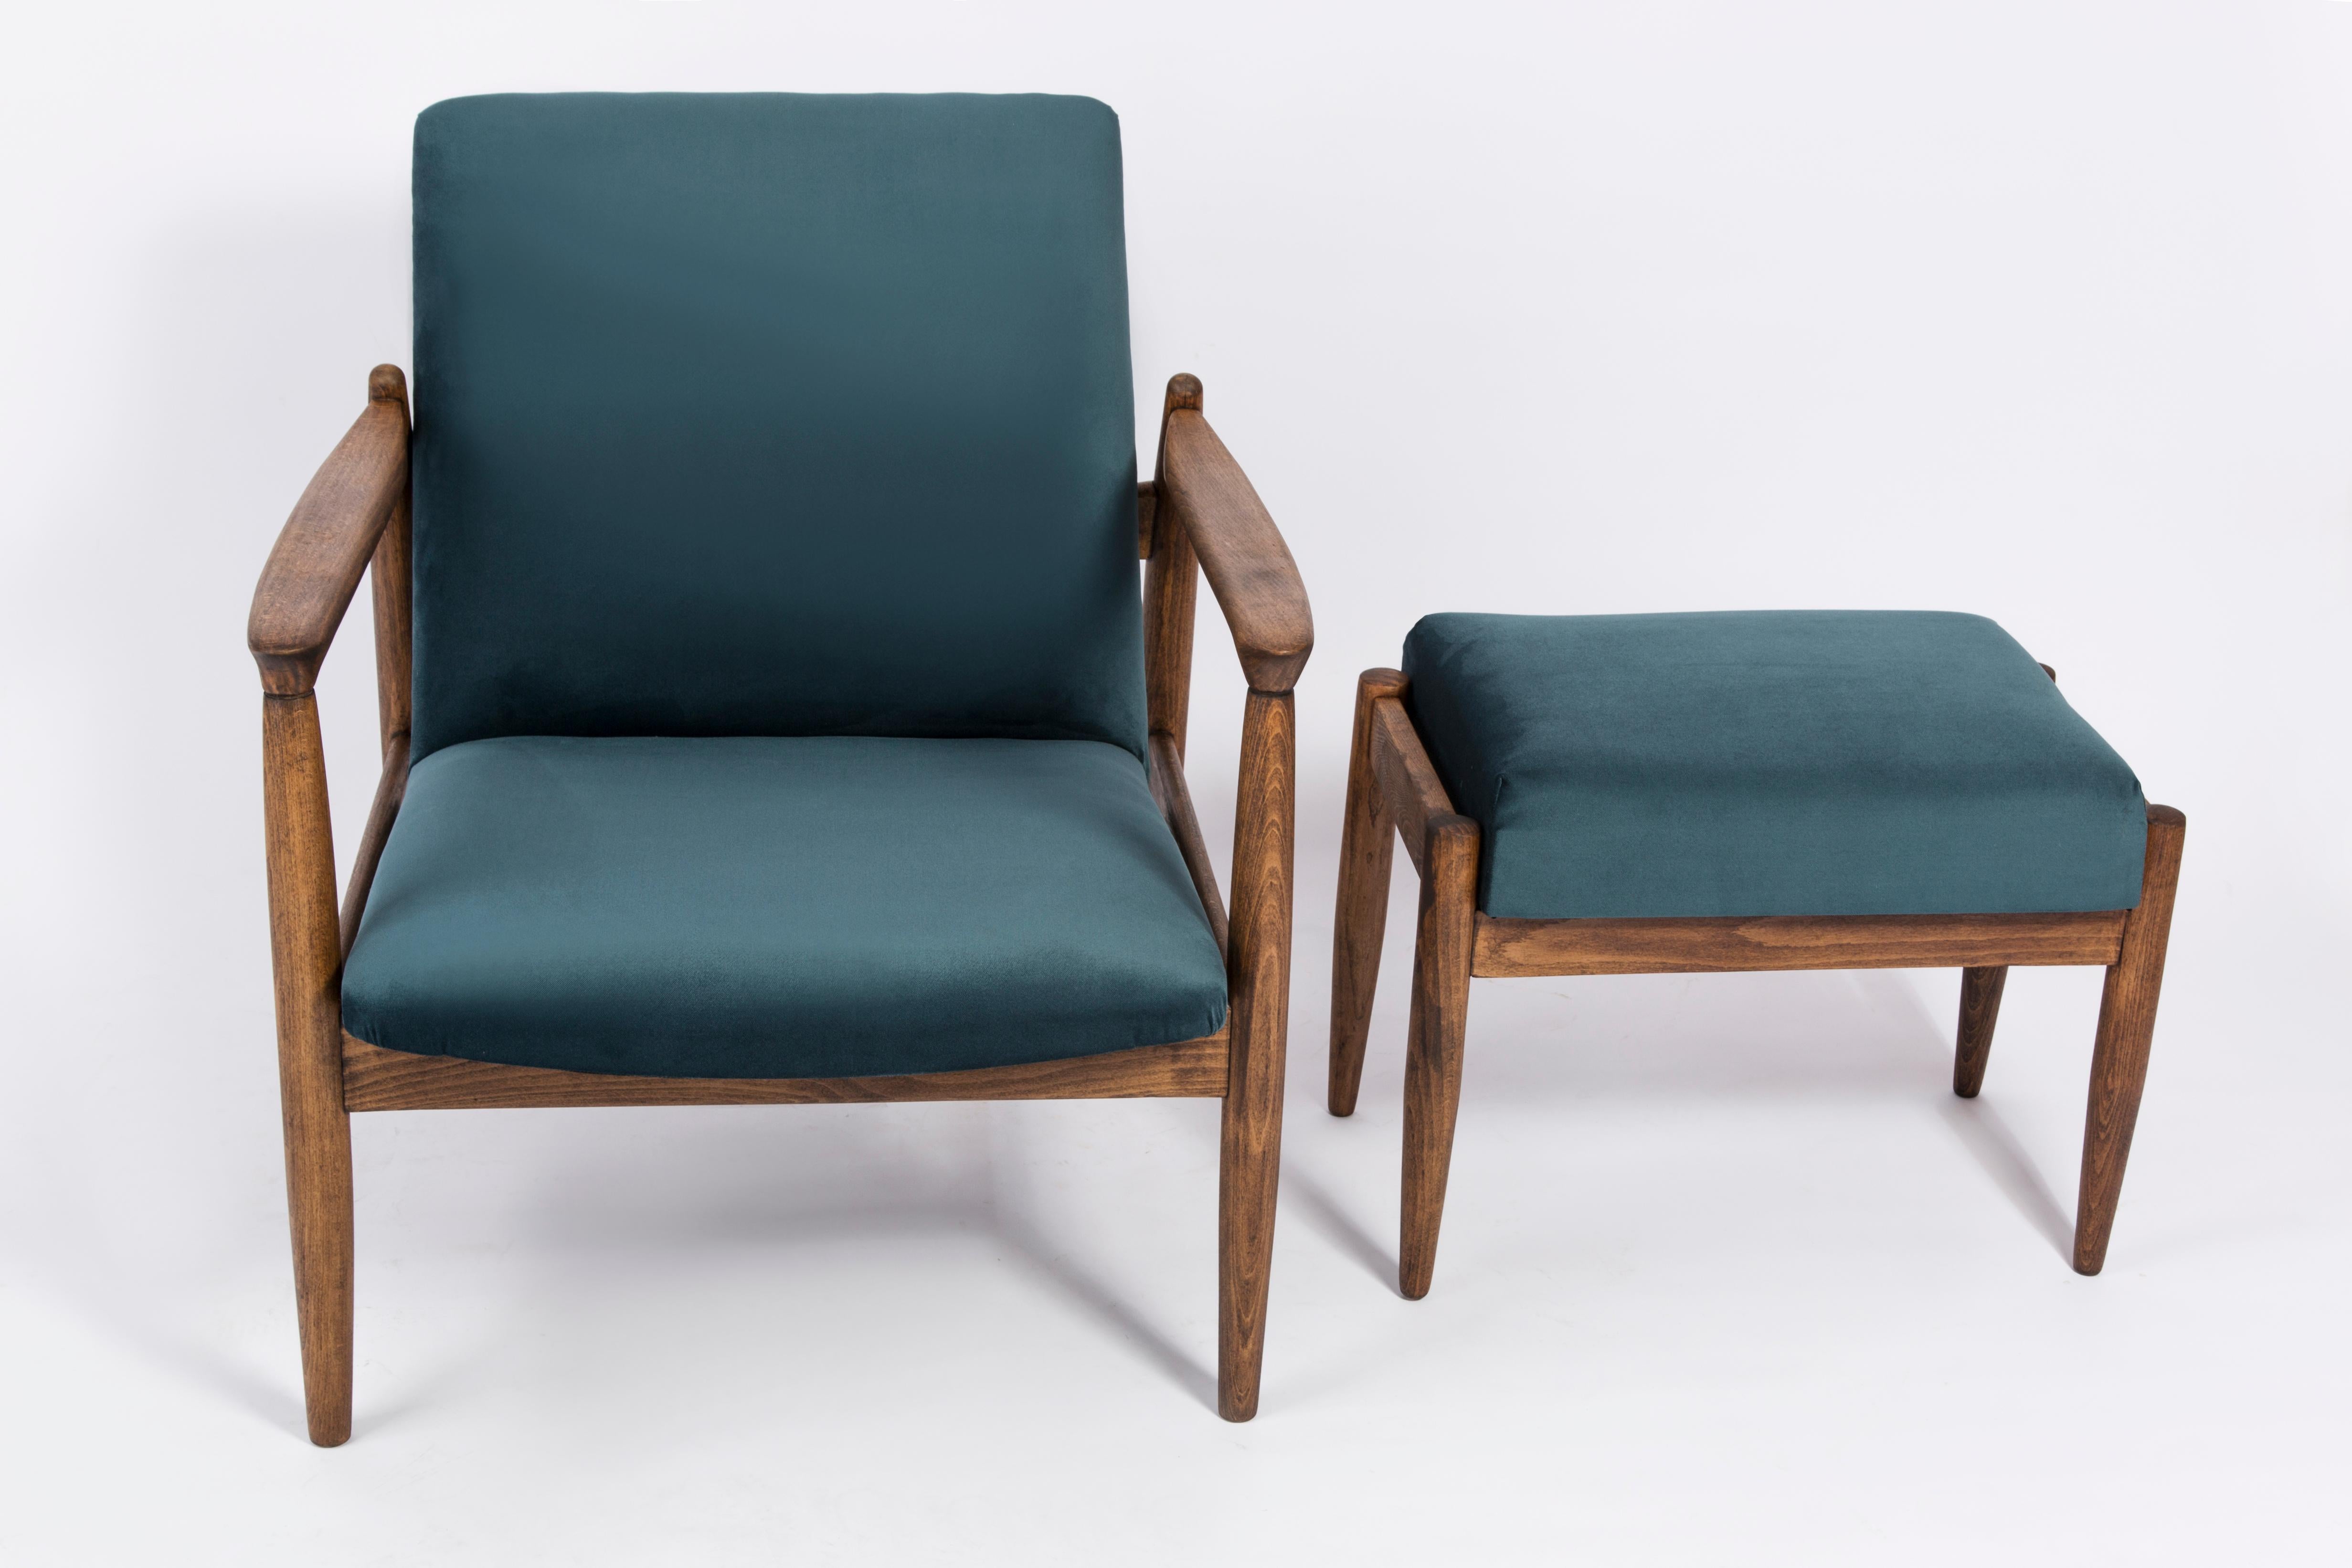 Set of Petrol Blue Vintage Armchairs and Stools, Edmund Homa, 1960s In Excellent Condition For Sale In 05-080 Hornowek, PL